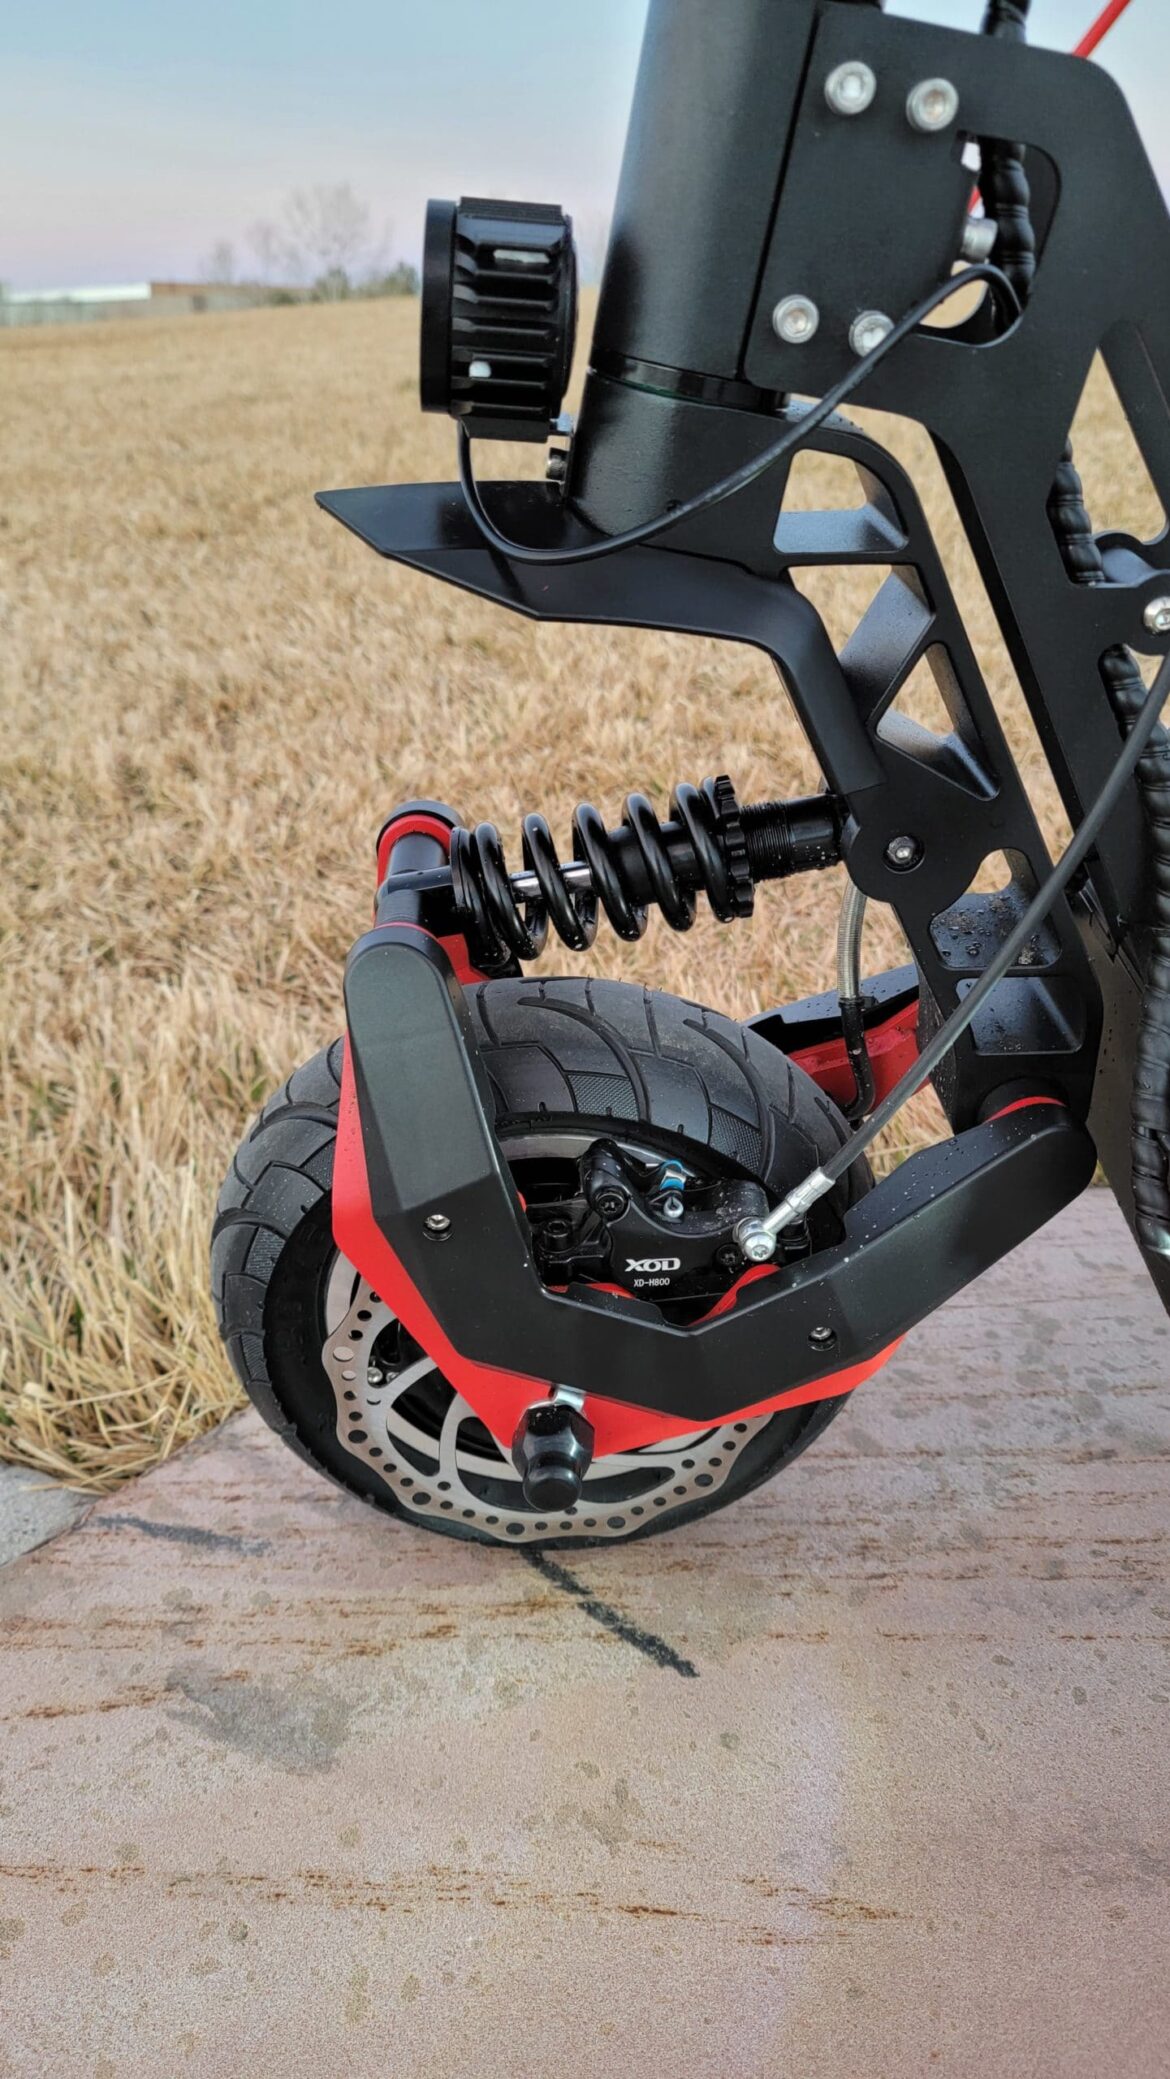 Eonmotors Blade X Pro Electric Scooter Review: High End Design and Components at an Affordable Price